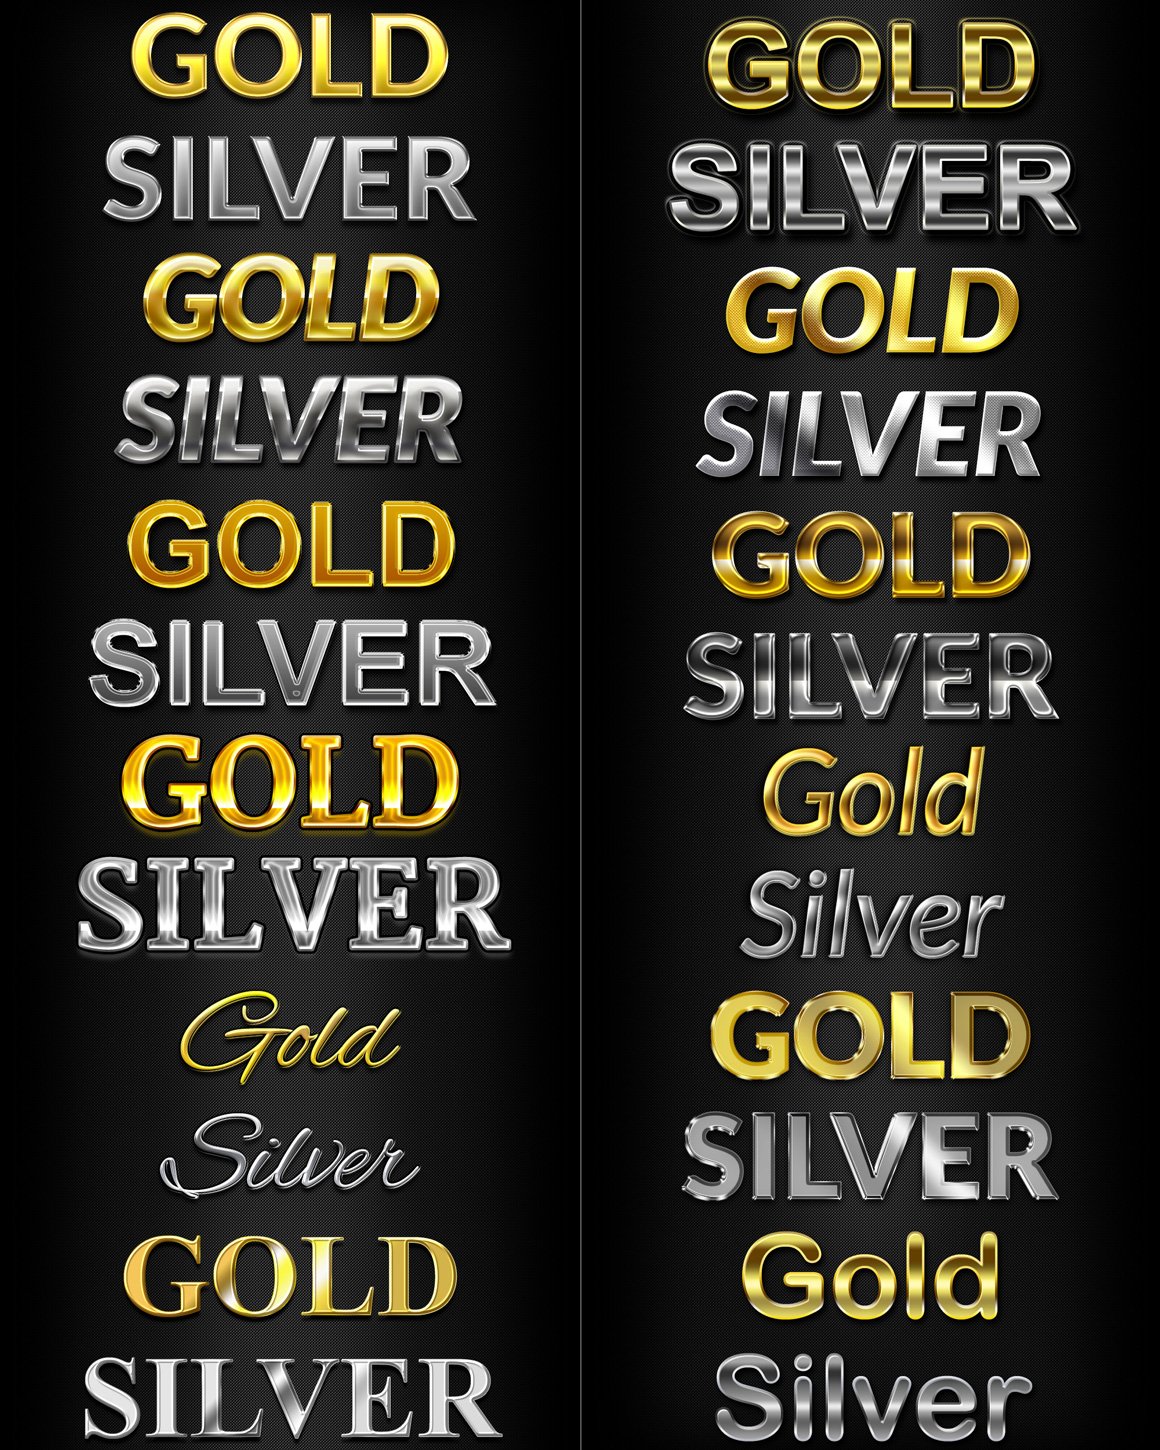 50 Gold & Silver Text Stylespreview image.